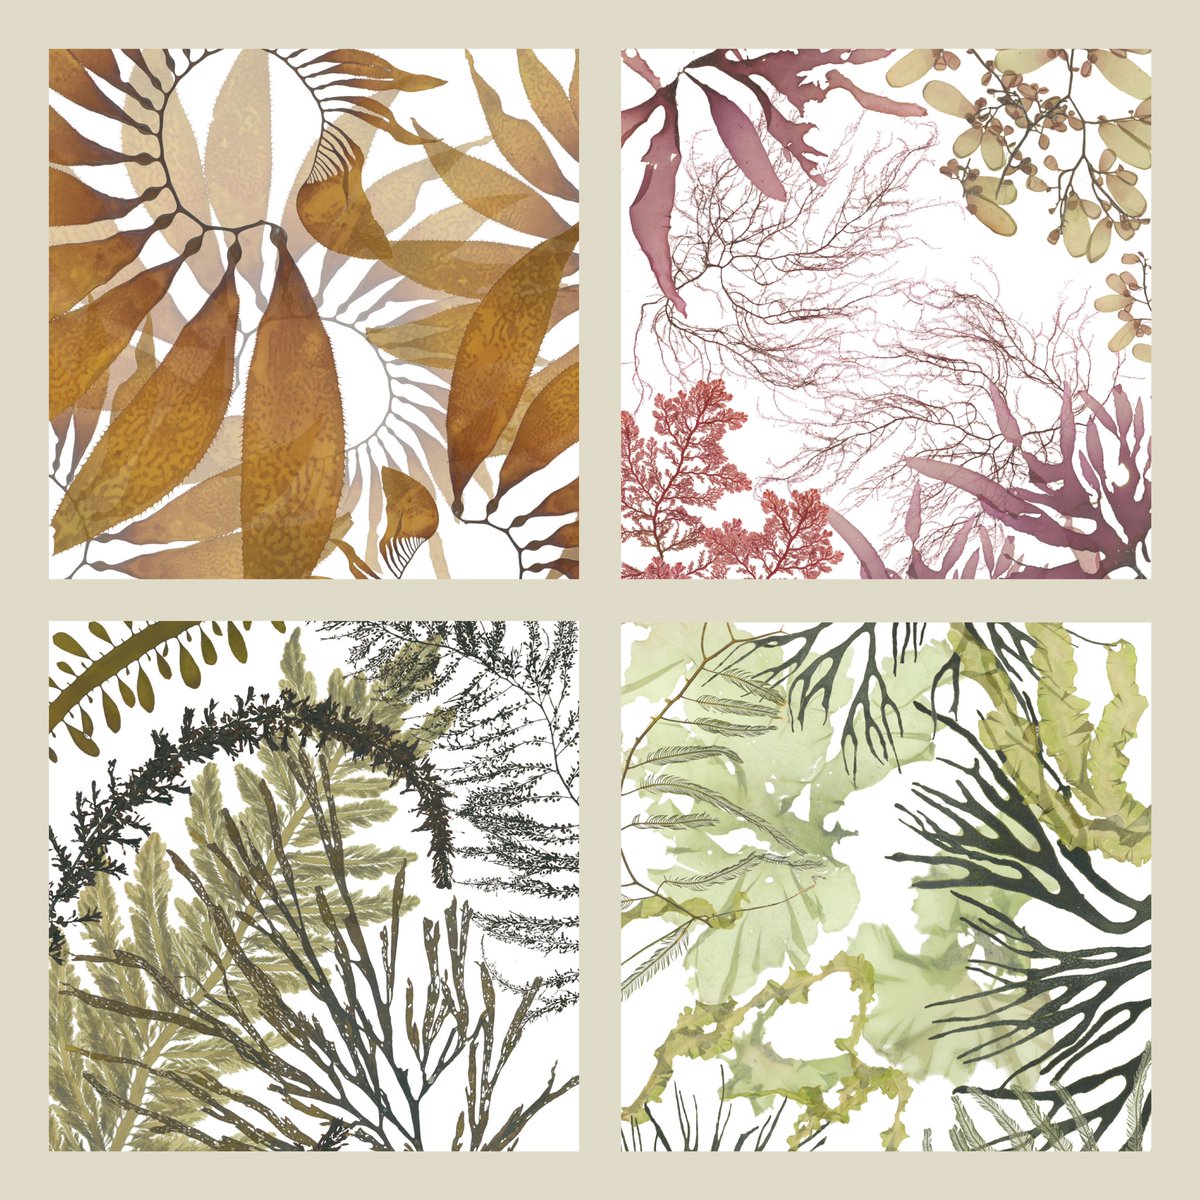 Artwork made from scanned seaweed pressings by @SmithCoralReef for #PhycologyFriday